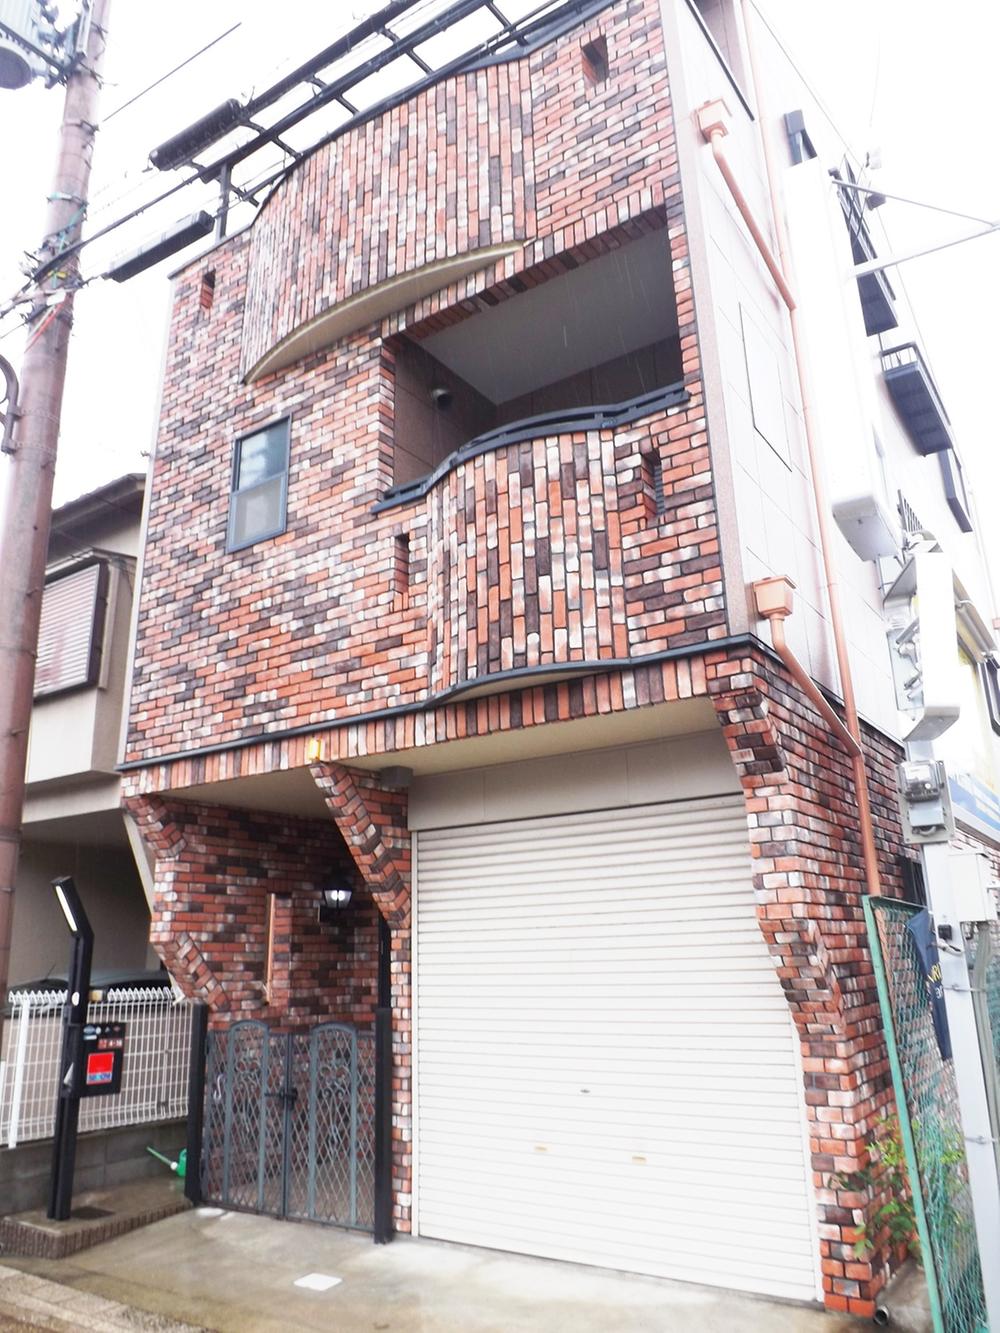 Local appearance photo. Local photos (appearance) Keihan "Hirakata," a 3-minute walk! 5LDK! Total floor area of ​​130.87 sq m (about 39 tsubo)! There are four sided balcony! Super close! It is the station area, but is a rare calm residential area! 